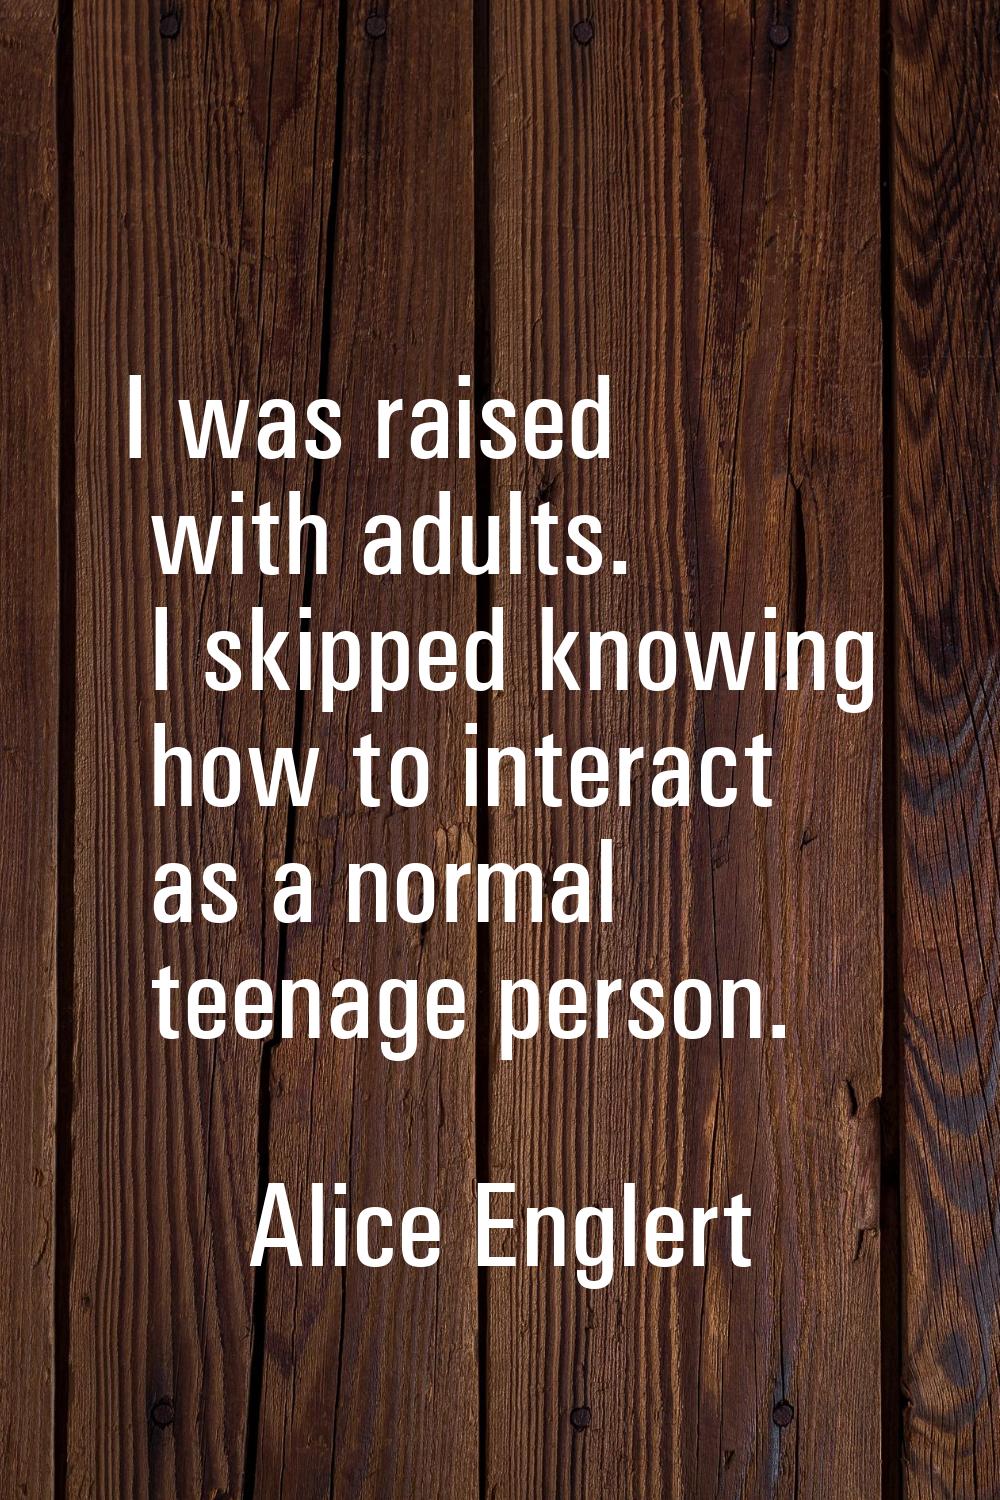 I was raised with adults. I skipped knowing how to interact as a normal teenage person.